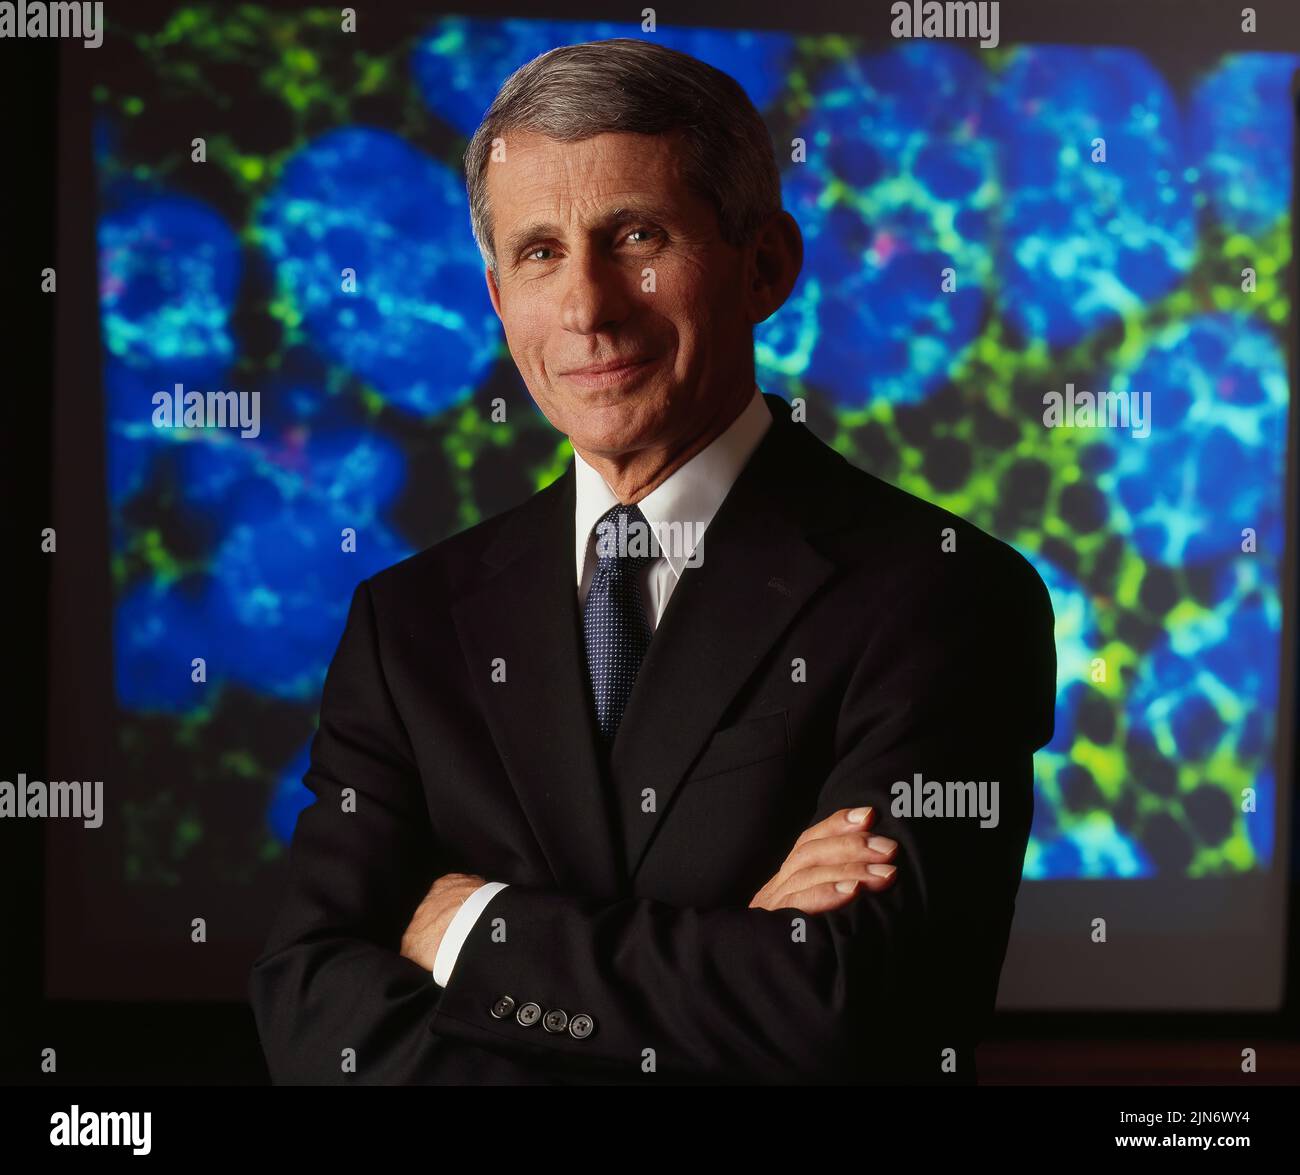 Anthony S. Fauci, M.D., NIAID Director Anthony S. Fauci, M.D., was appointed Director of NIAID in 1984. He oversees an extensive research portfolio of basic and applied research to prevent, diagnose, and treat established infectious diseases such as HIV/AIDS, respiratory infections, diarrheal diseases, tuberculosis and malaria as well as emerging diseases such as Ebola and Zika. Credit: NIAID Stock Photo